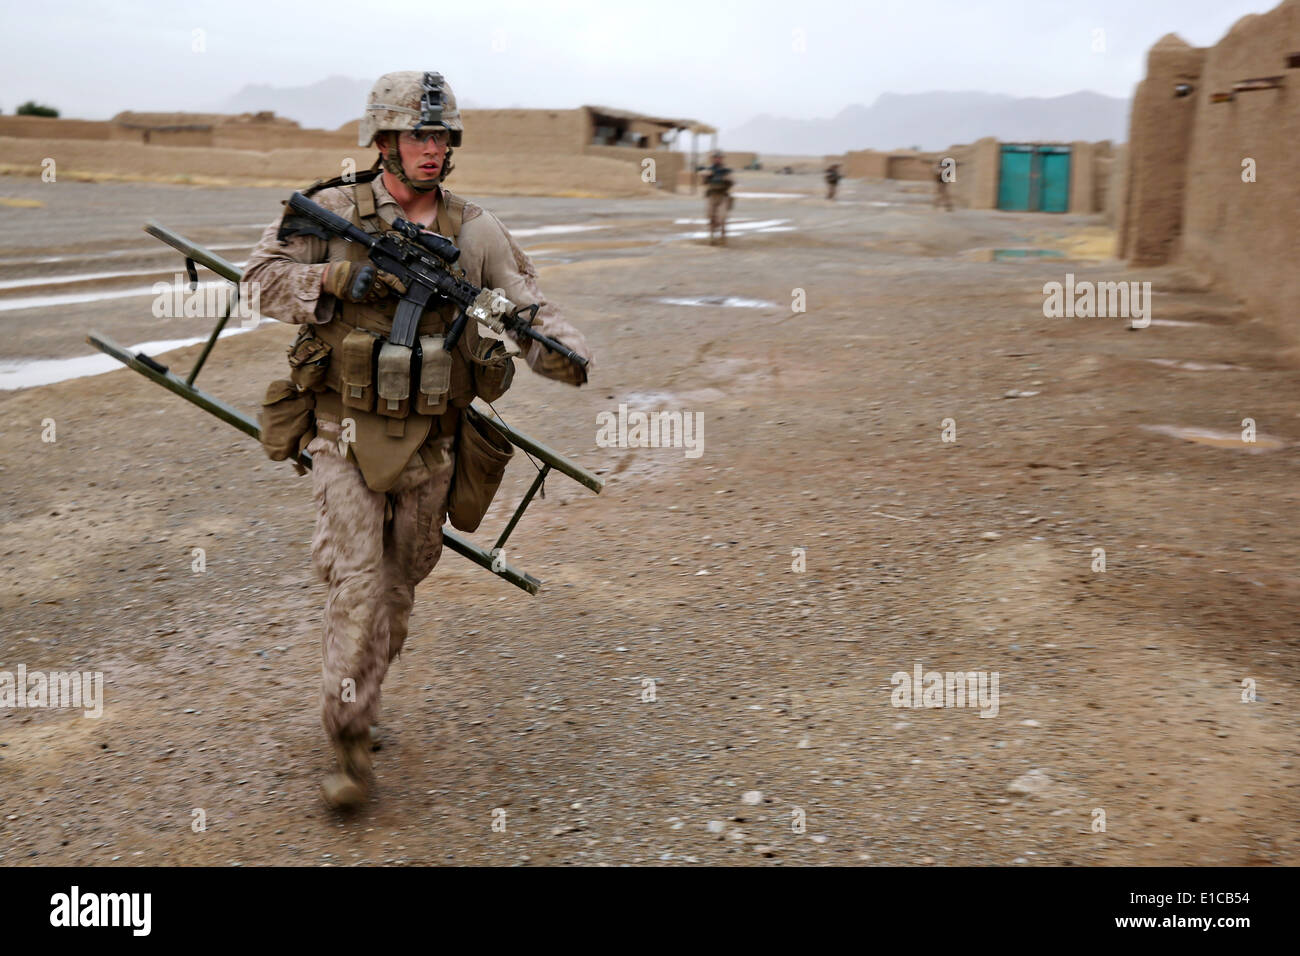 A US Marine with the 1st Battalion, 7th Marine Regiment, runs to provide a combat ladder to a fellow Marine searching a compound May 16, 2014 in Larr Village, Helmand province, Afghanistan. Stock Photo